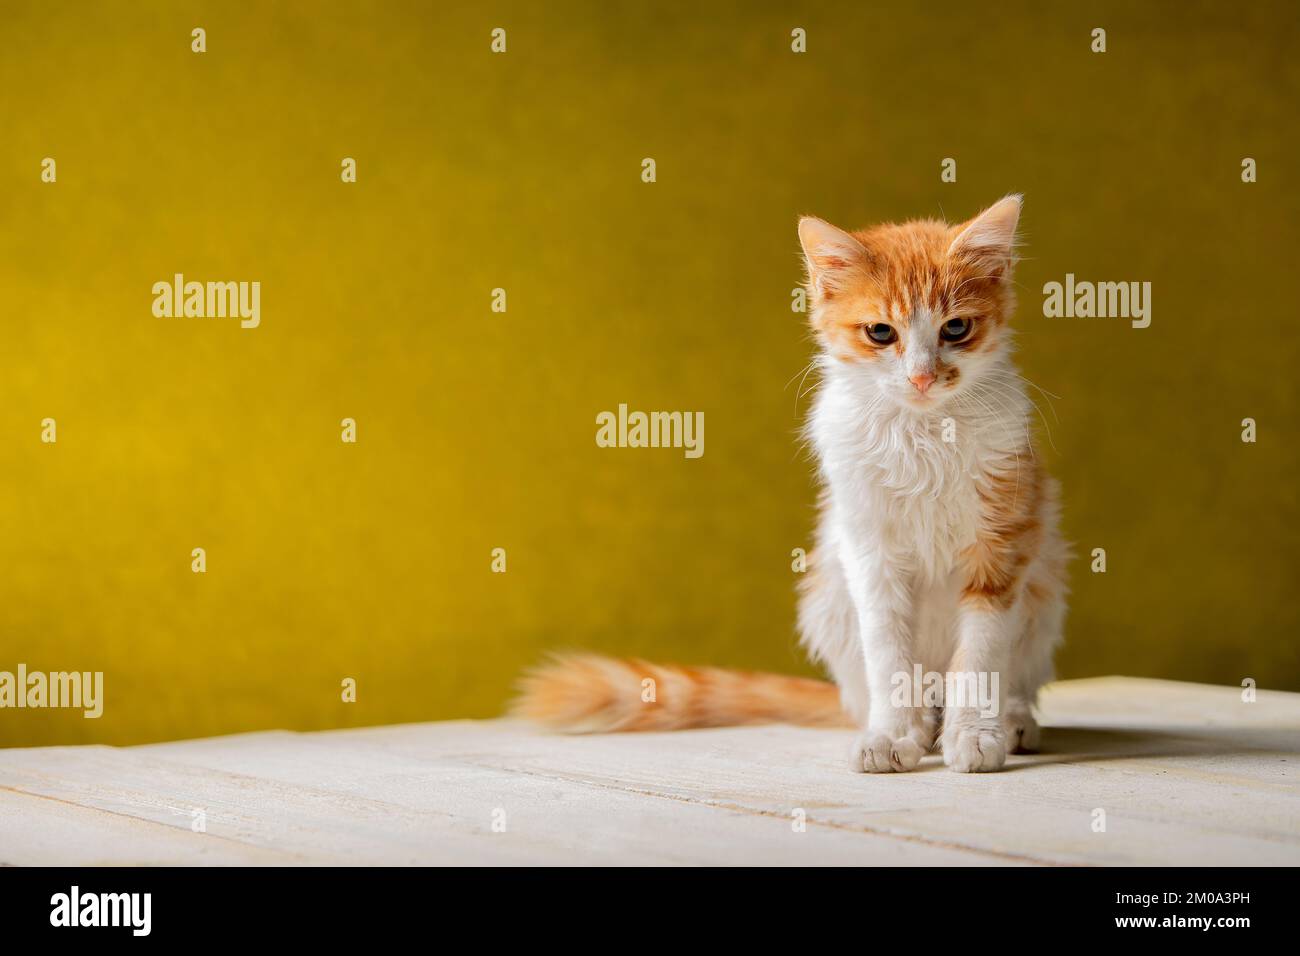 cute red kitten is standing on the white wooden table Stock Photo